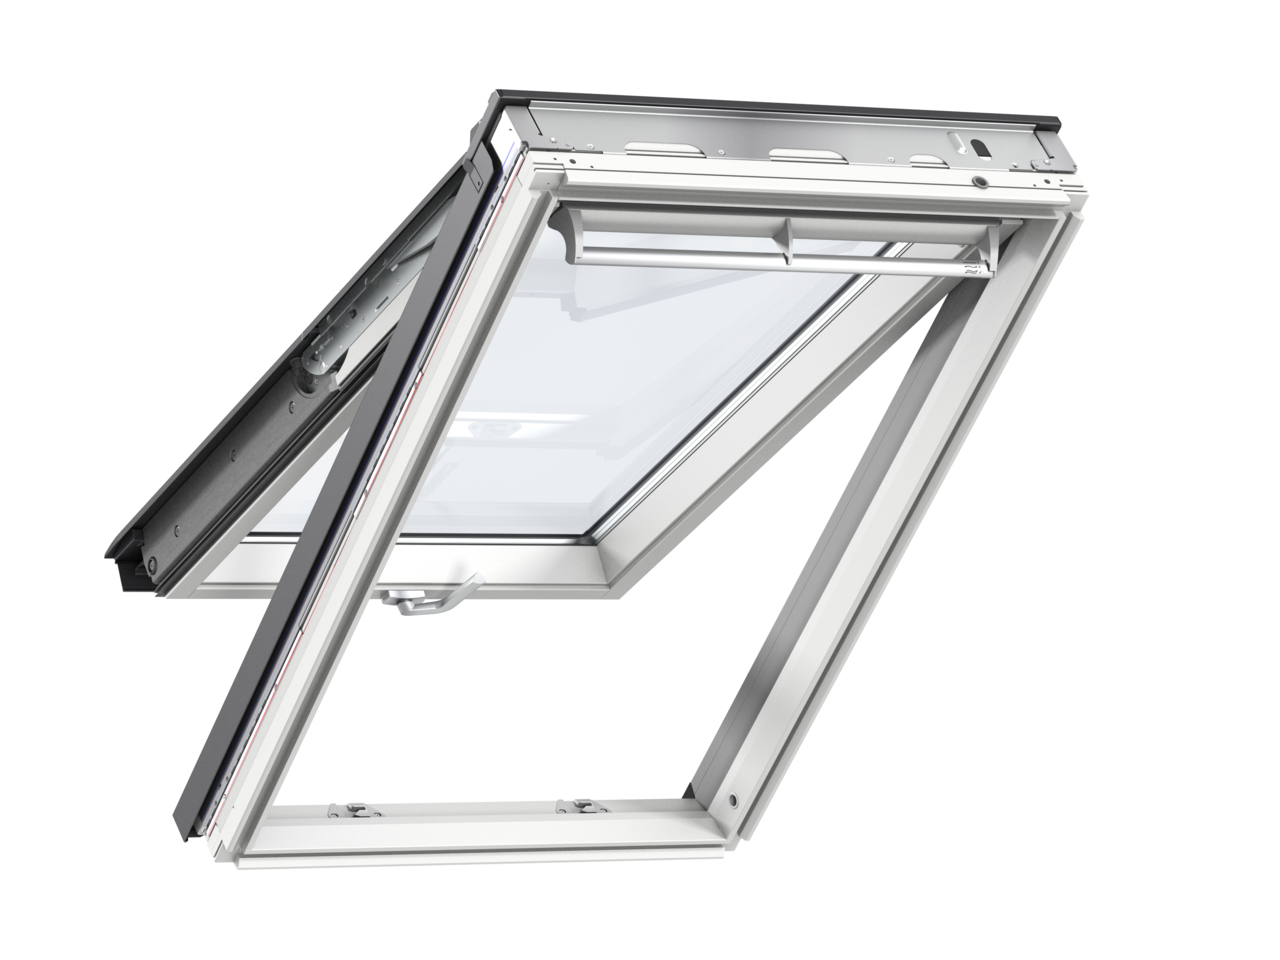 Velux GPL FK06 660 x 1180mm Top Hung 66Pane Roof Window - White Painted